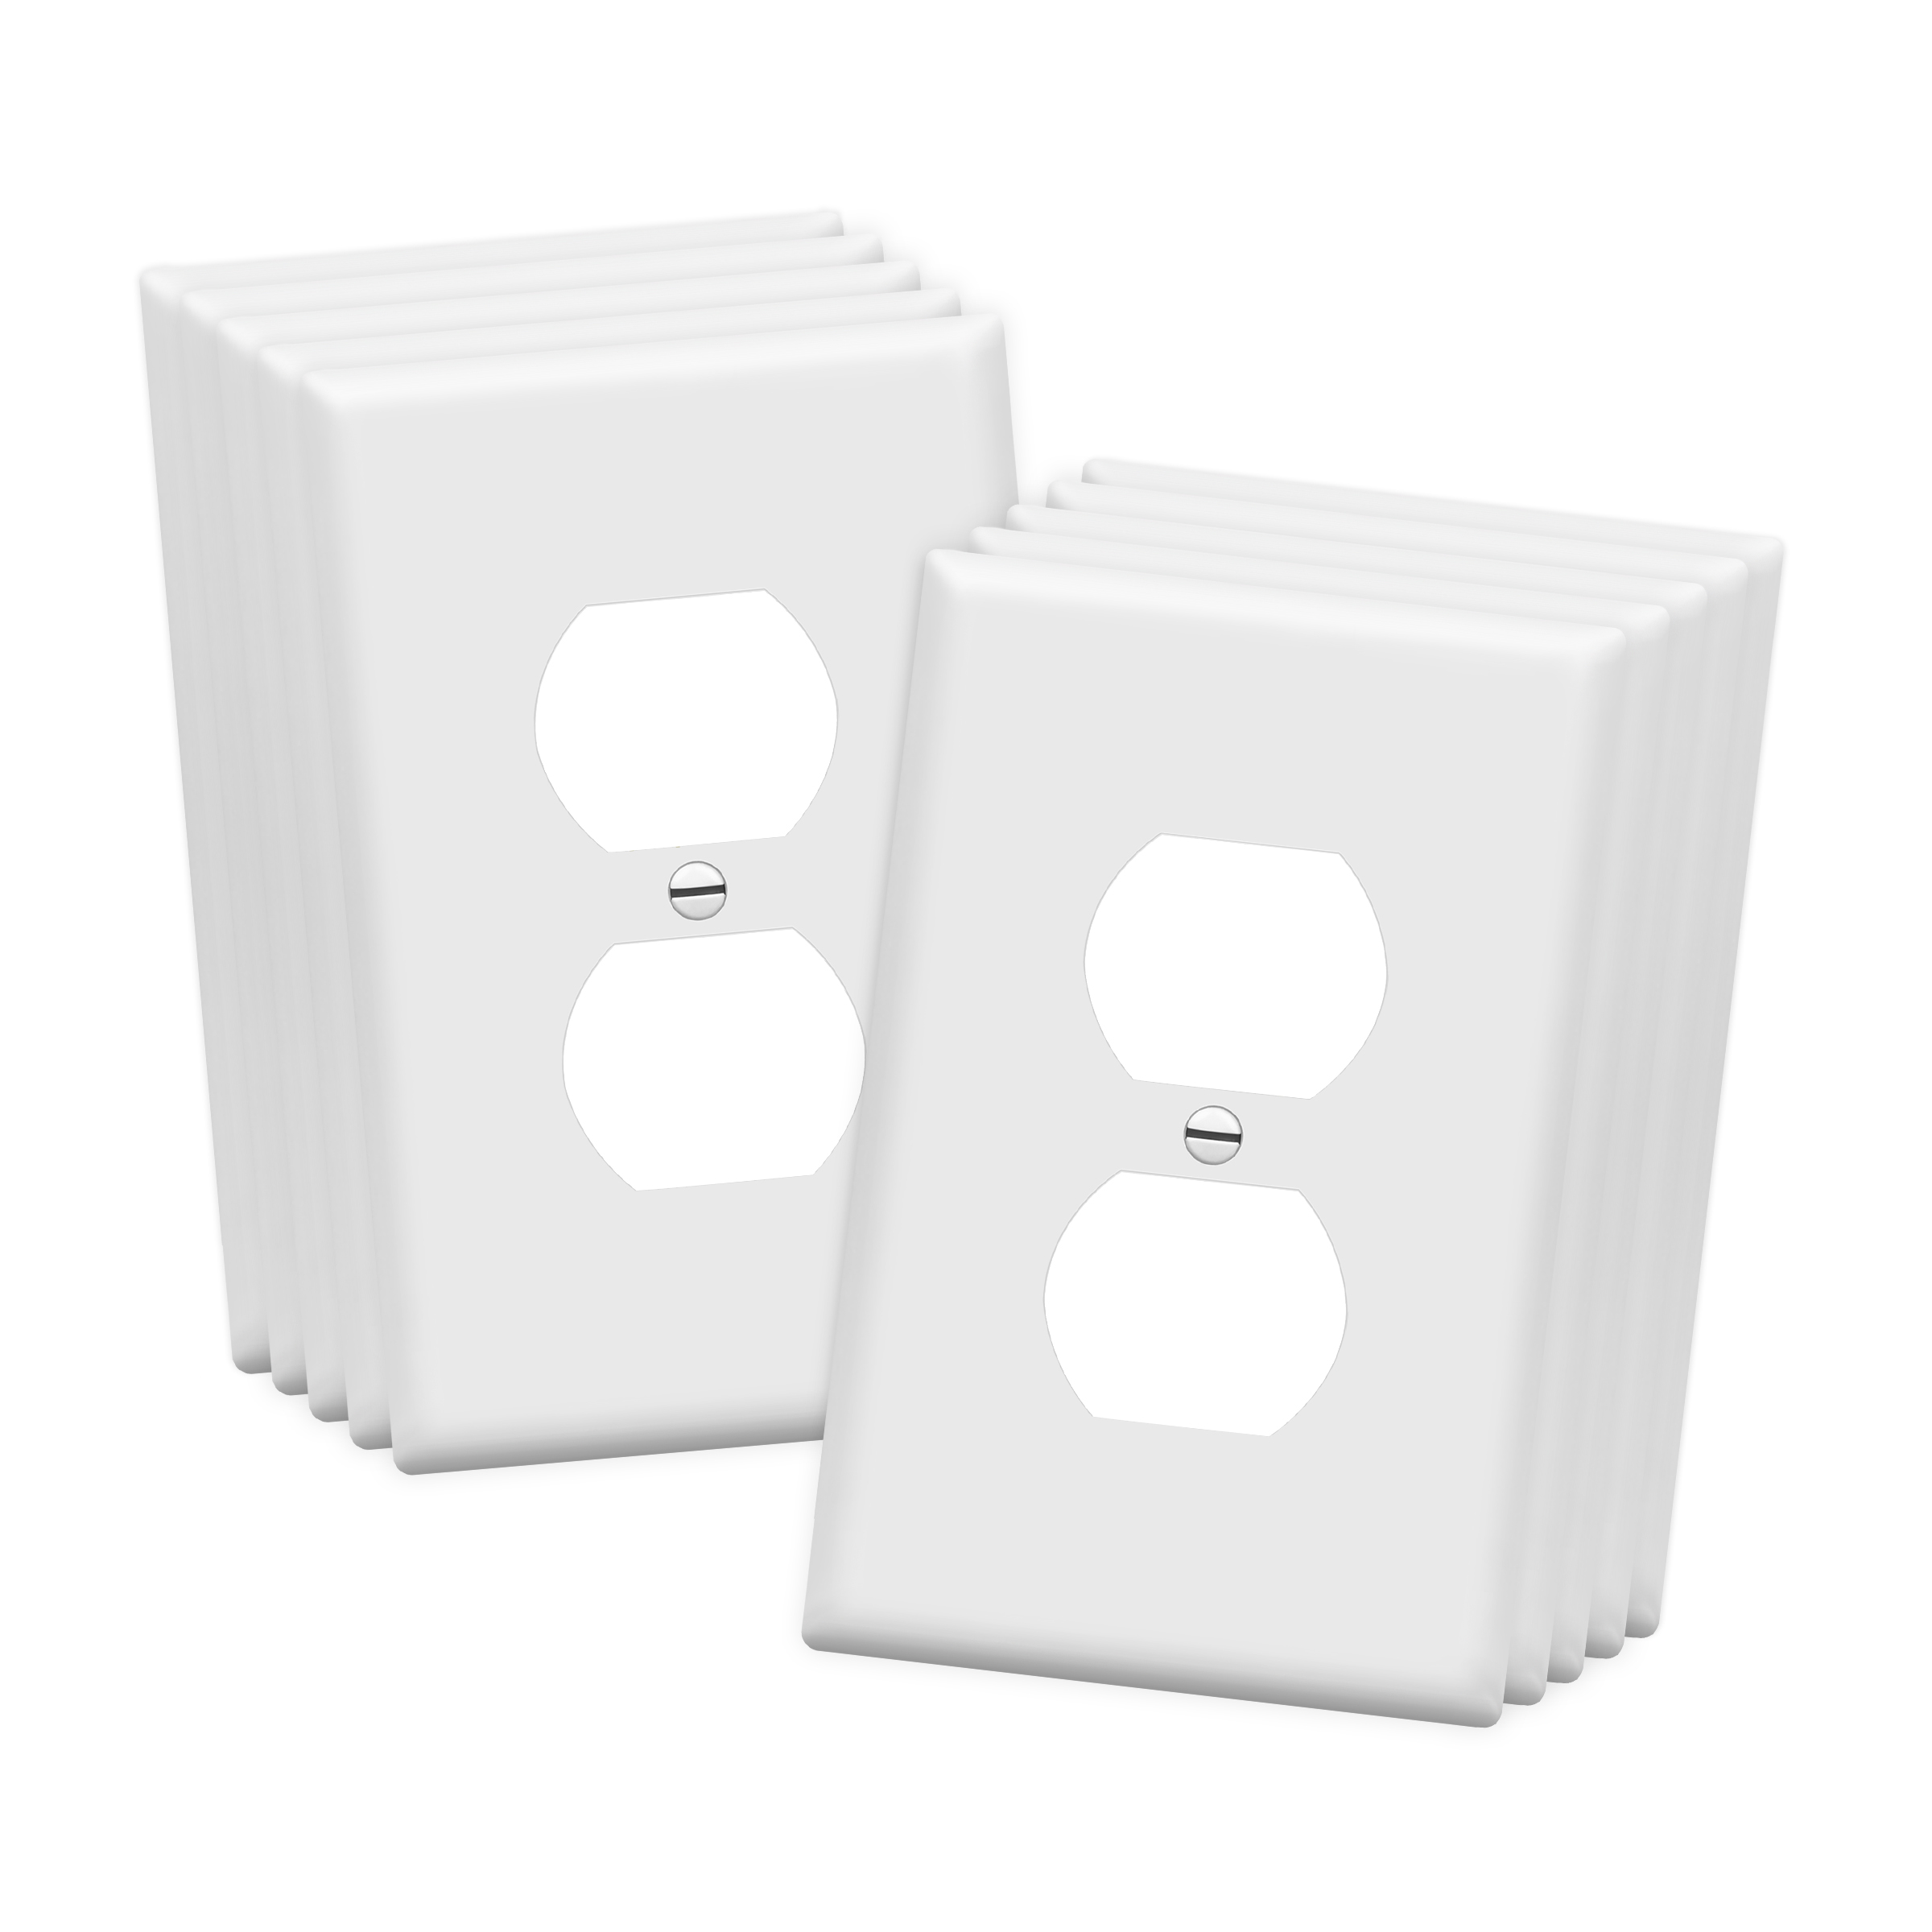 ENERLITES Duplex Wall Plate, Electrical Outlet Cover, Mid-Size 1-Gang, Polycarbonate Thermoplastic, White, 10 Pack - image 1 of 5